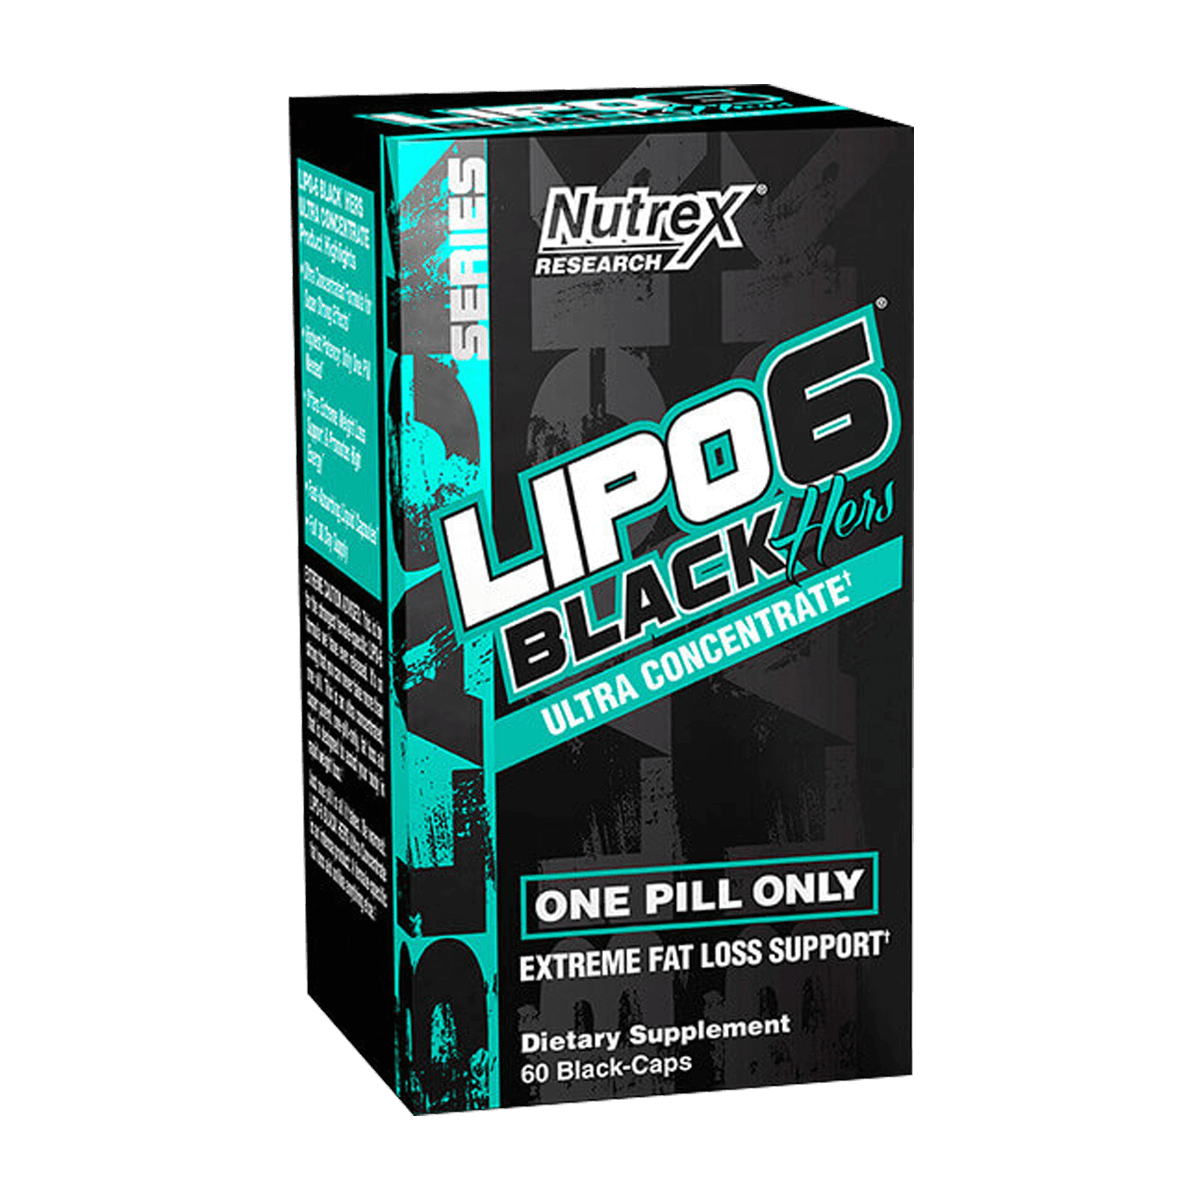 Nutrex Lipo 6 Black Hers Ultra Concentrate 60 Caps Body Club